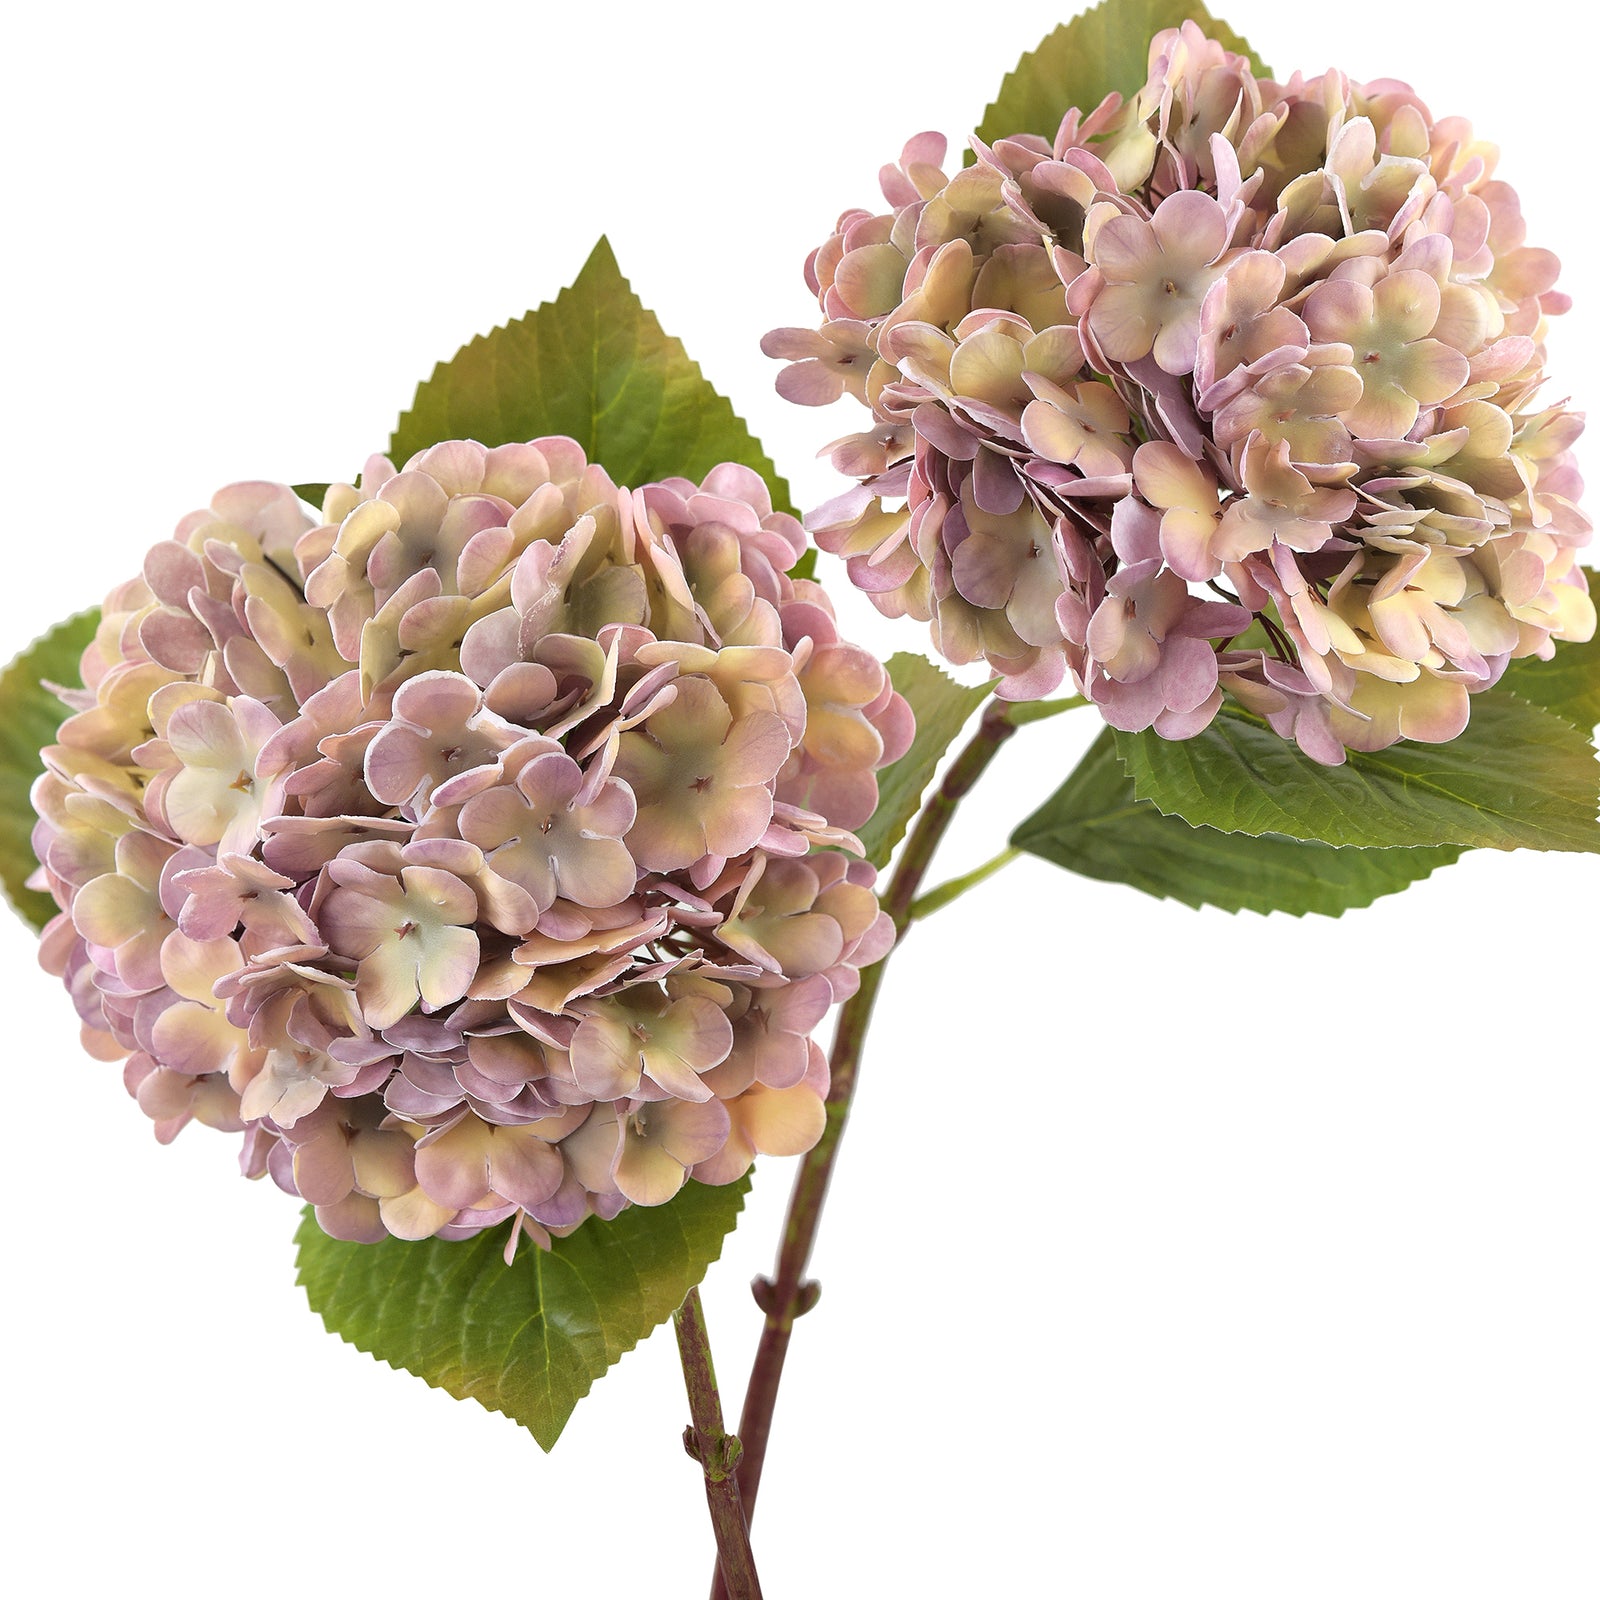 2 Long Stems Real Touch Hydrangea Artificial Flowers Ethereal Amethyst (Soft Lavender) Lifelike, Elegant, and Versatile Decor for Any Occasion (Copy) (Copy)